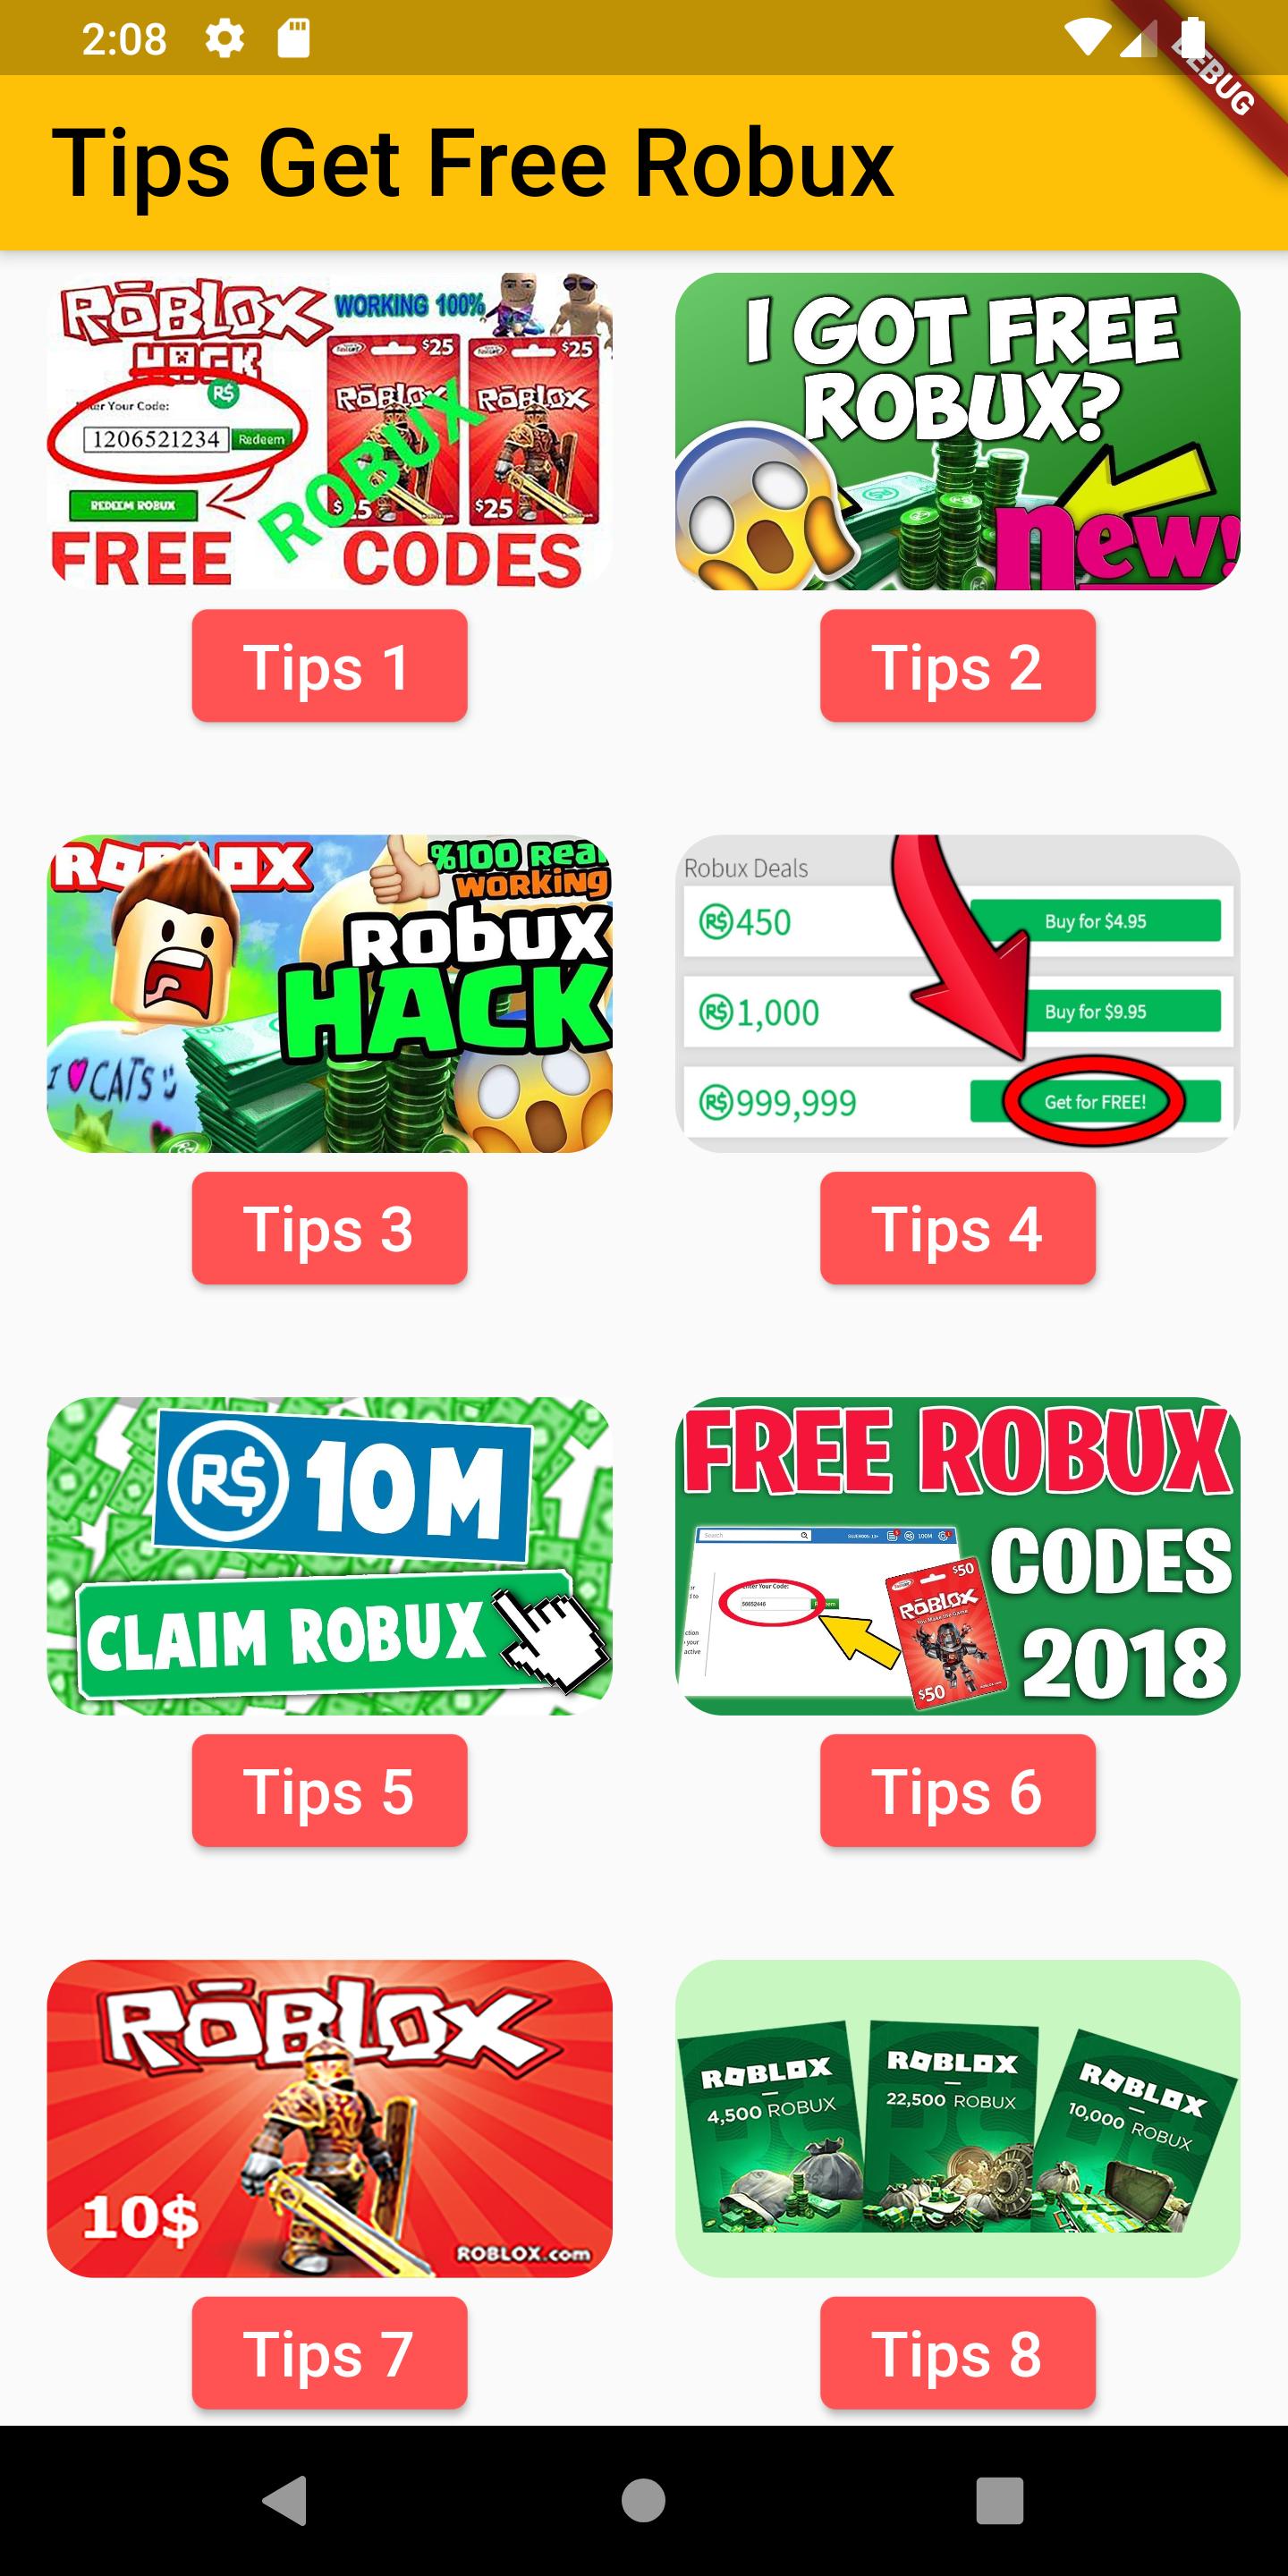 Trips Get Free Robux For Roblox Rbx For Android Apk Download - download free robux for roblox